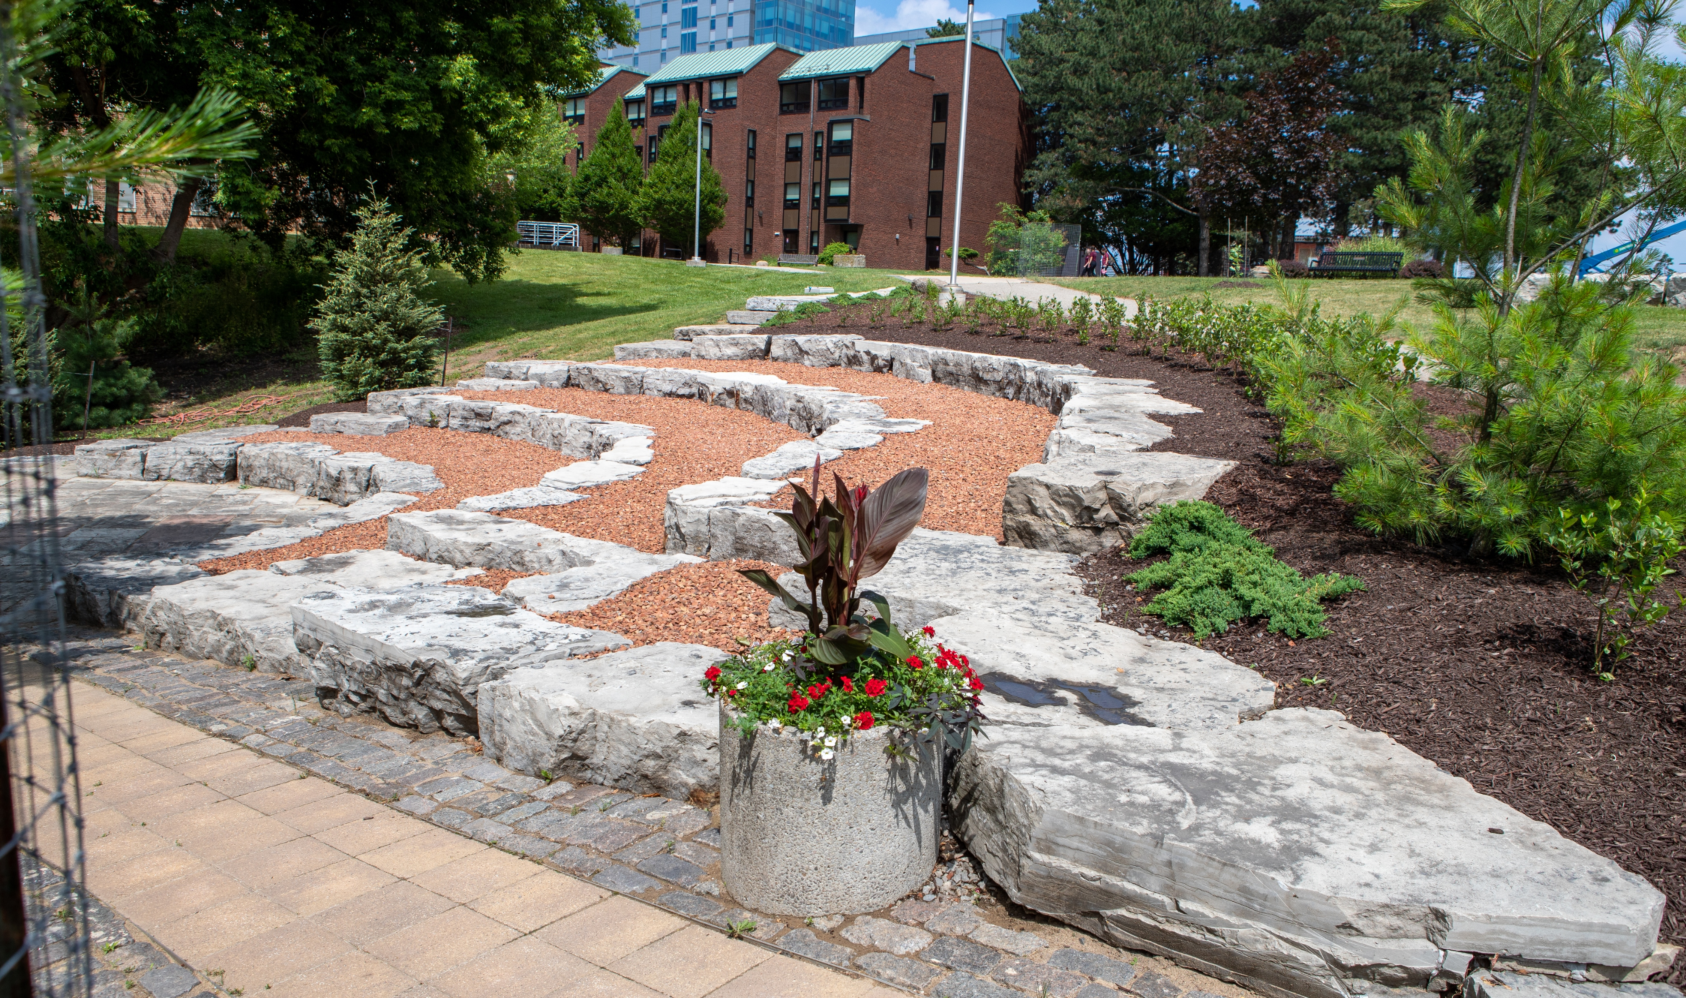 Side view of the stone seating area at the Indigenous Circle on McMaster's campus.